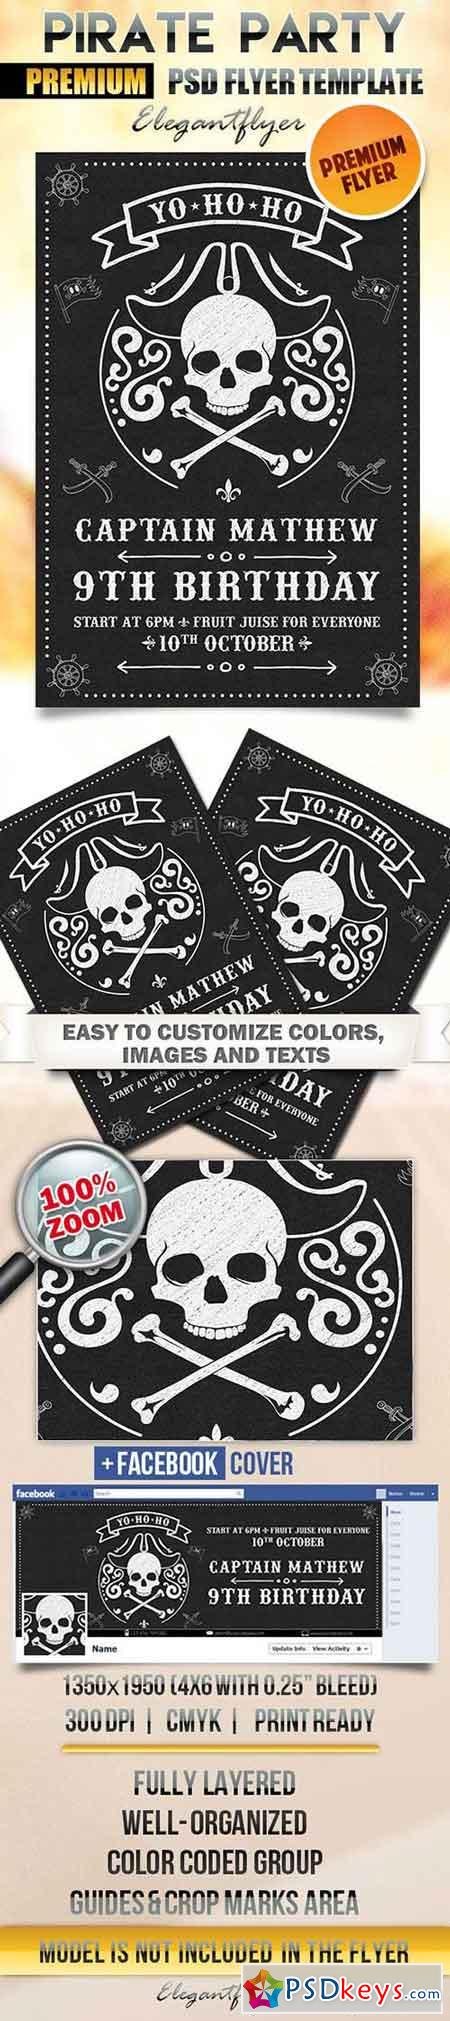 Pirate Party Flyer PSD Template + Facebook Cover